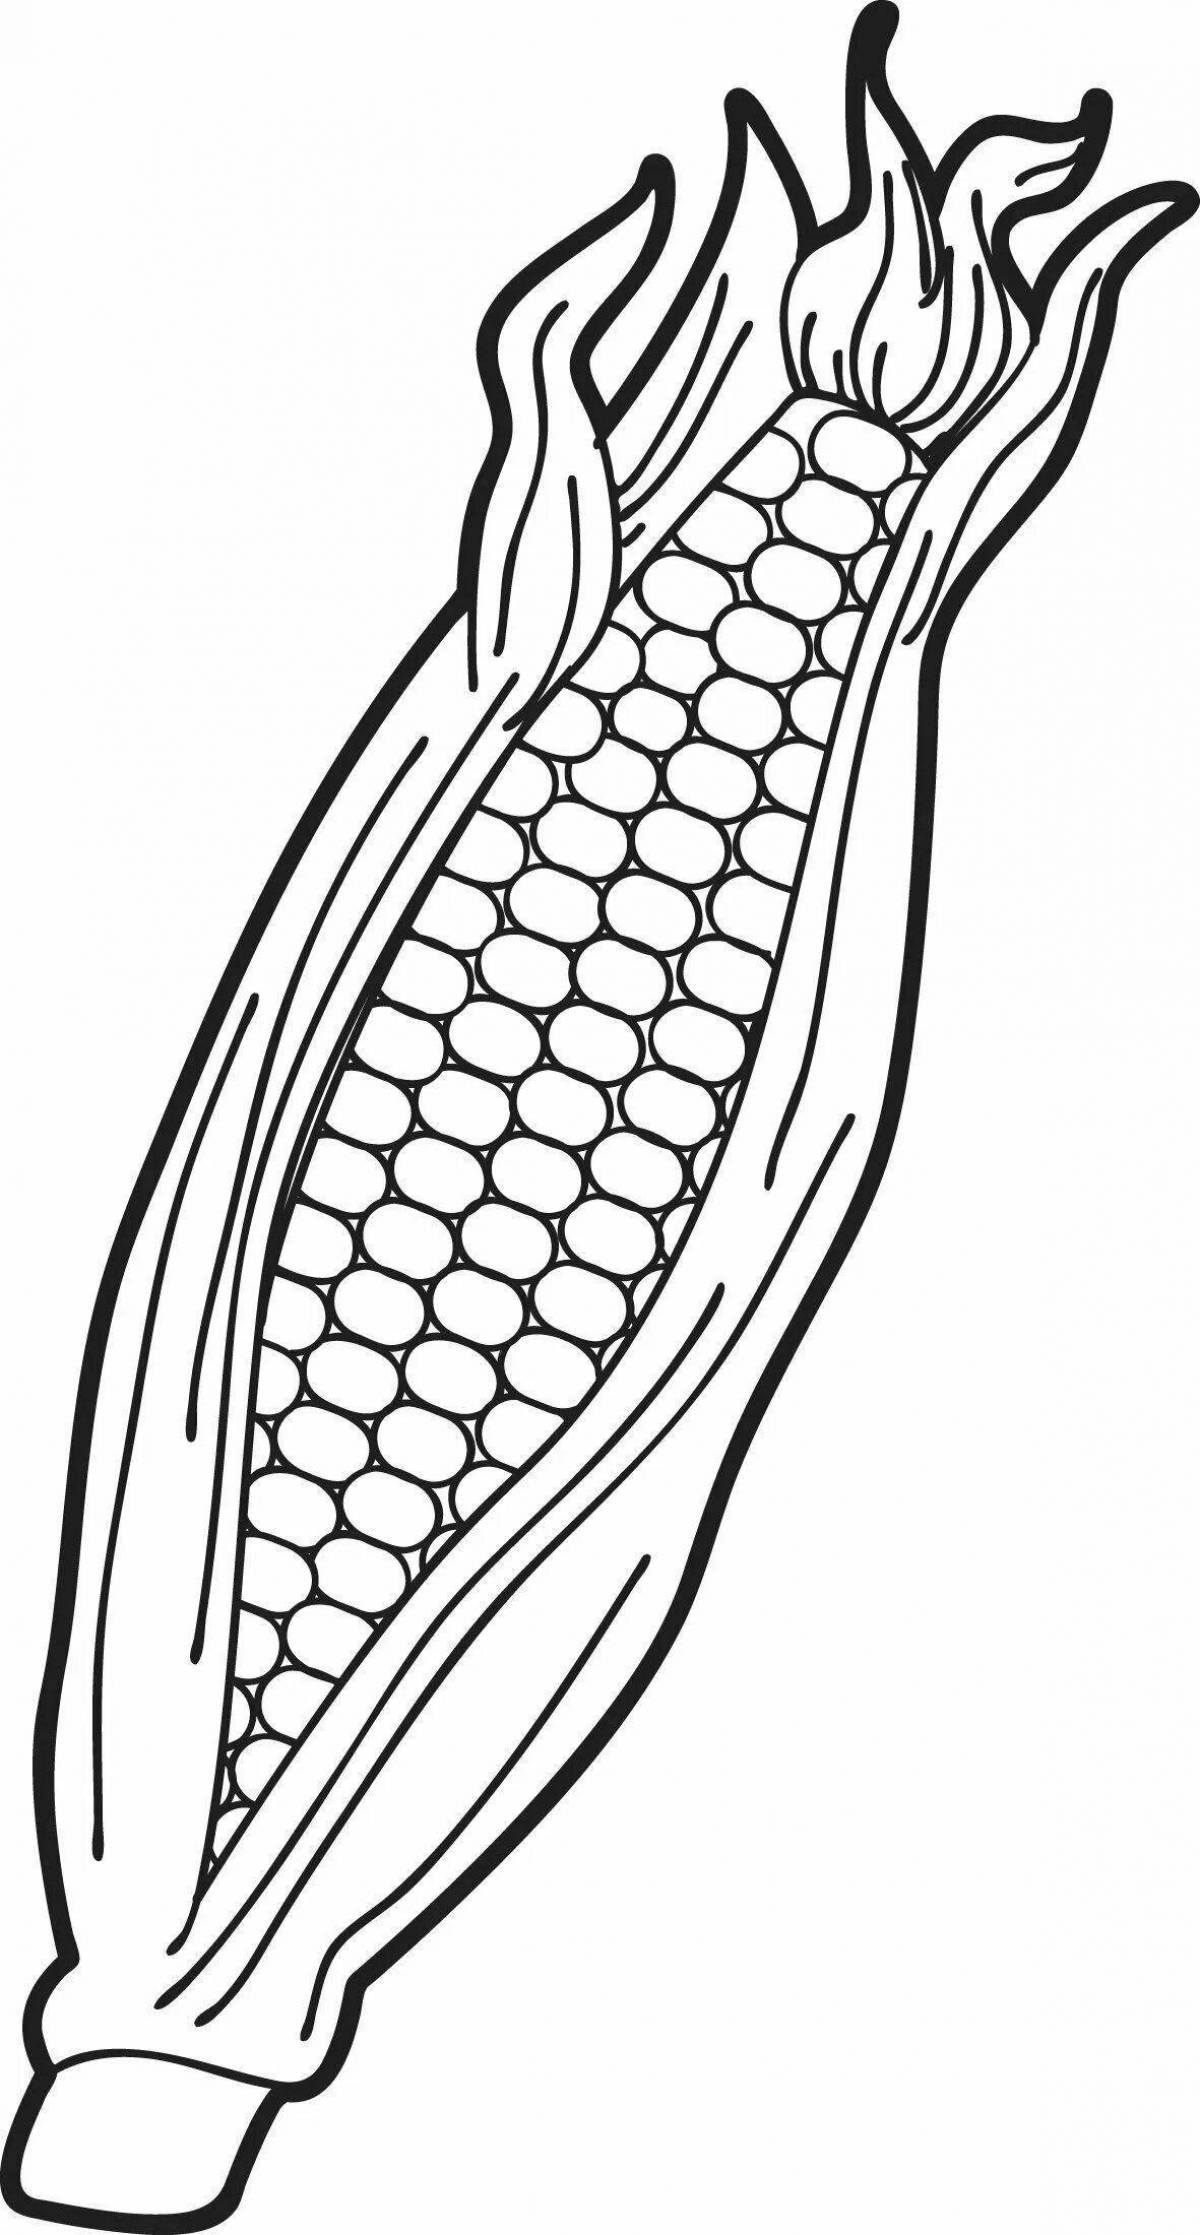 Adorable corn coloring book for kids